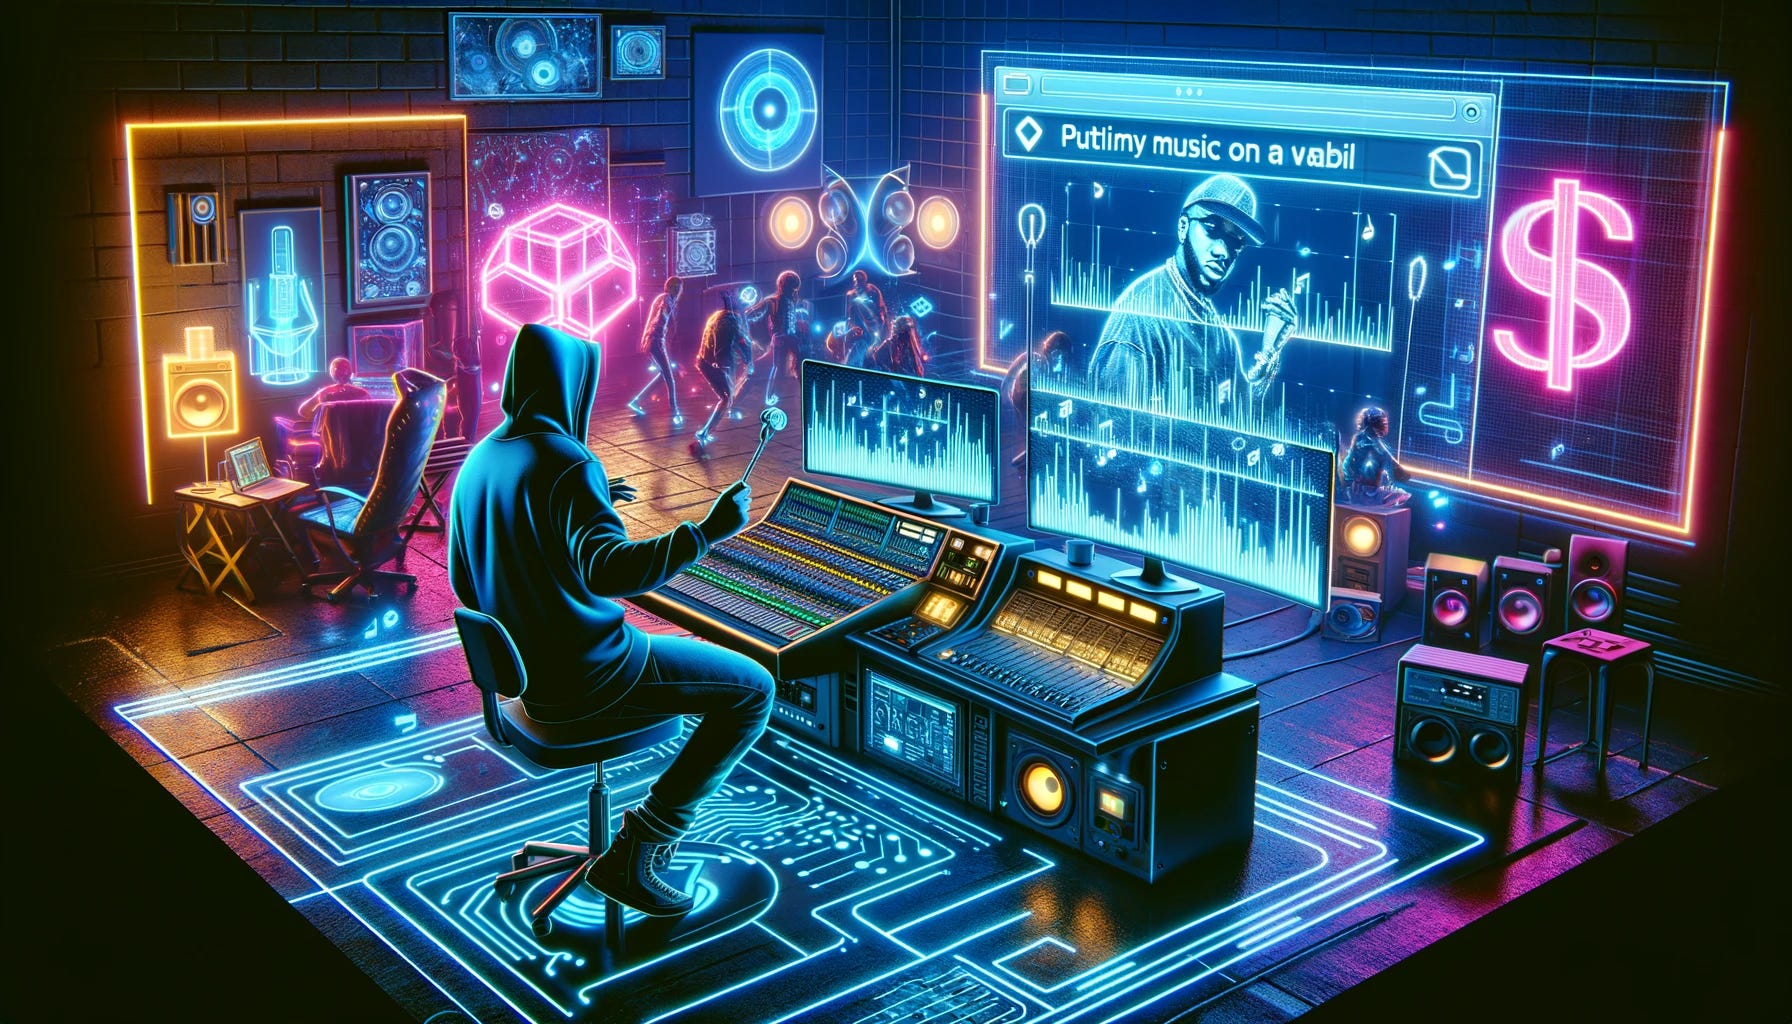 Create a landscape-oriented image depicting a rapper in a cyberpunk-themed studio, focusing on putting his music online on a Web3 wallet. The rapper, embodying a diverse representation, is engaging with advanced studio equipment amidst neon lights, digital screens, and holographic displays. The scene should capture the essence of a vibrant and technological cyberpunk world, highlighting the process of uploading music to a Web3 wallet, symbolized by digital sound waves and visual representations of tracks. The studio setting and the rapper's interaction with futuristic interfaces underscore the fusion of music, technology, and digital finance, illustrating the dynamic and diverse world of music production and distribution in a futuristic setting.